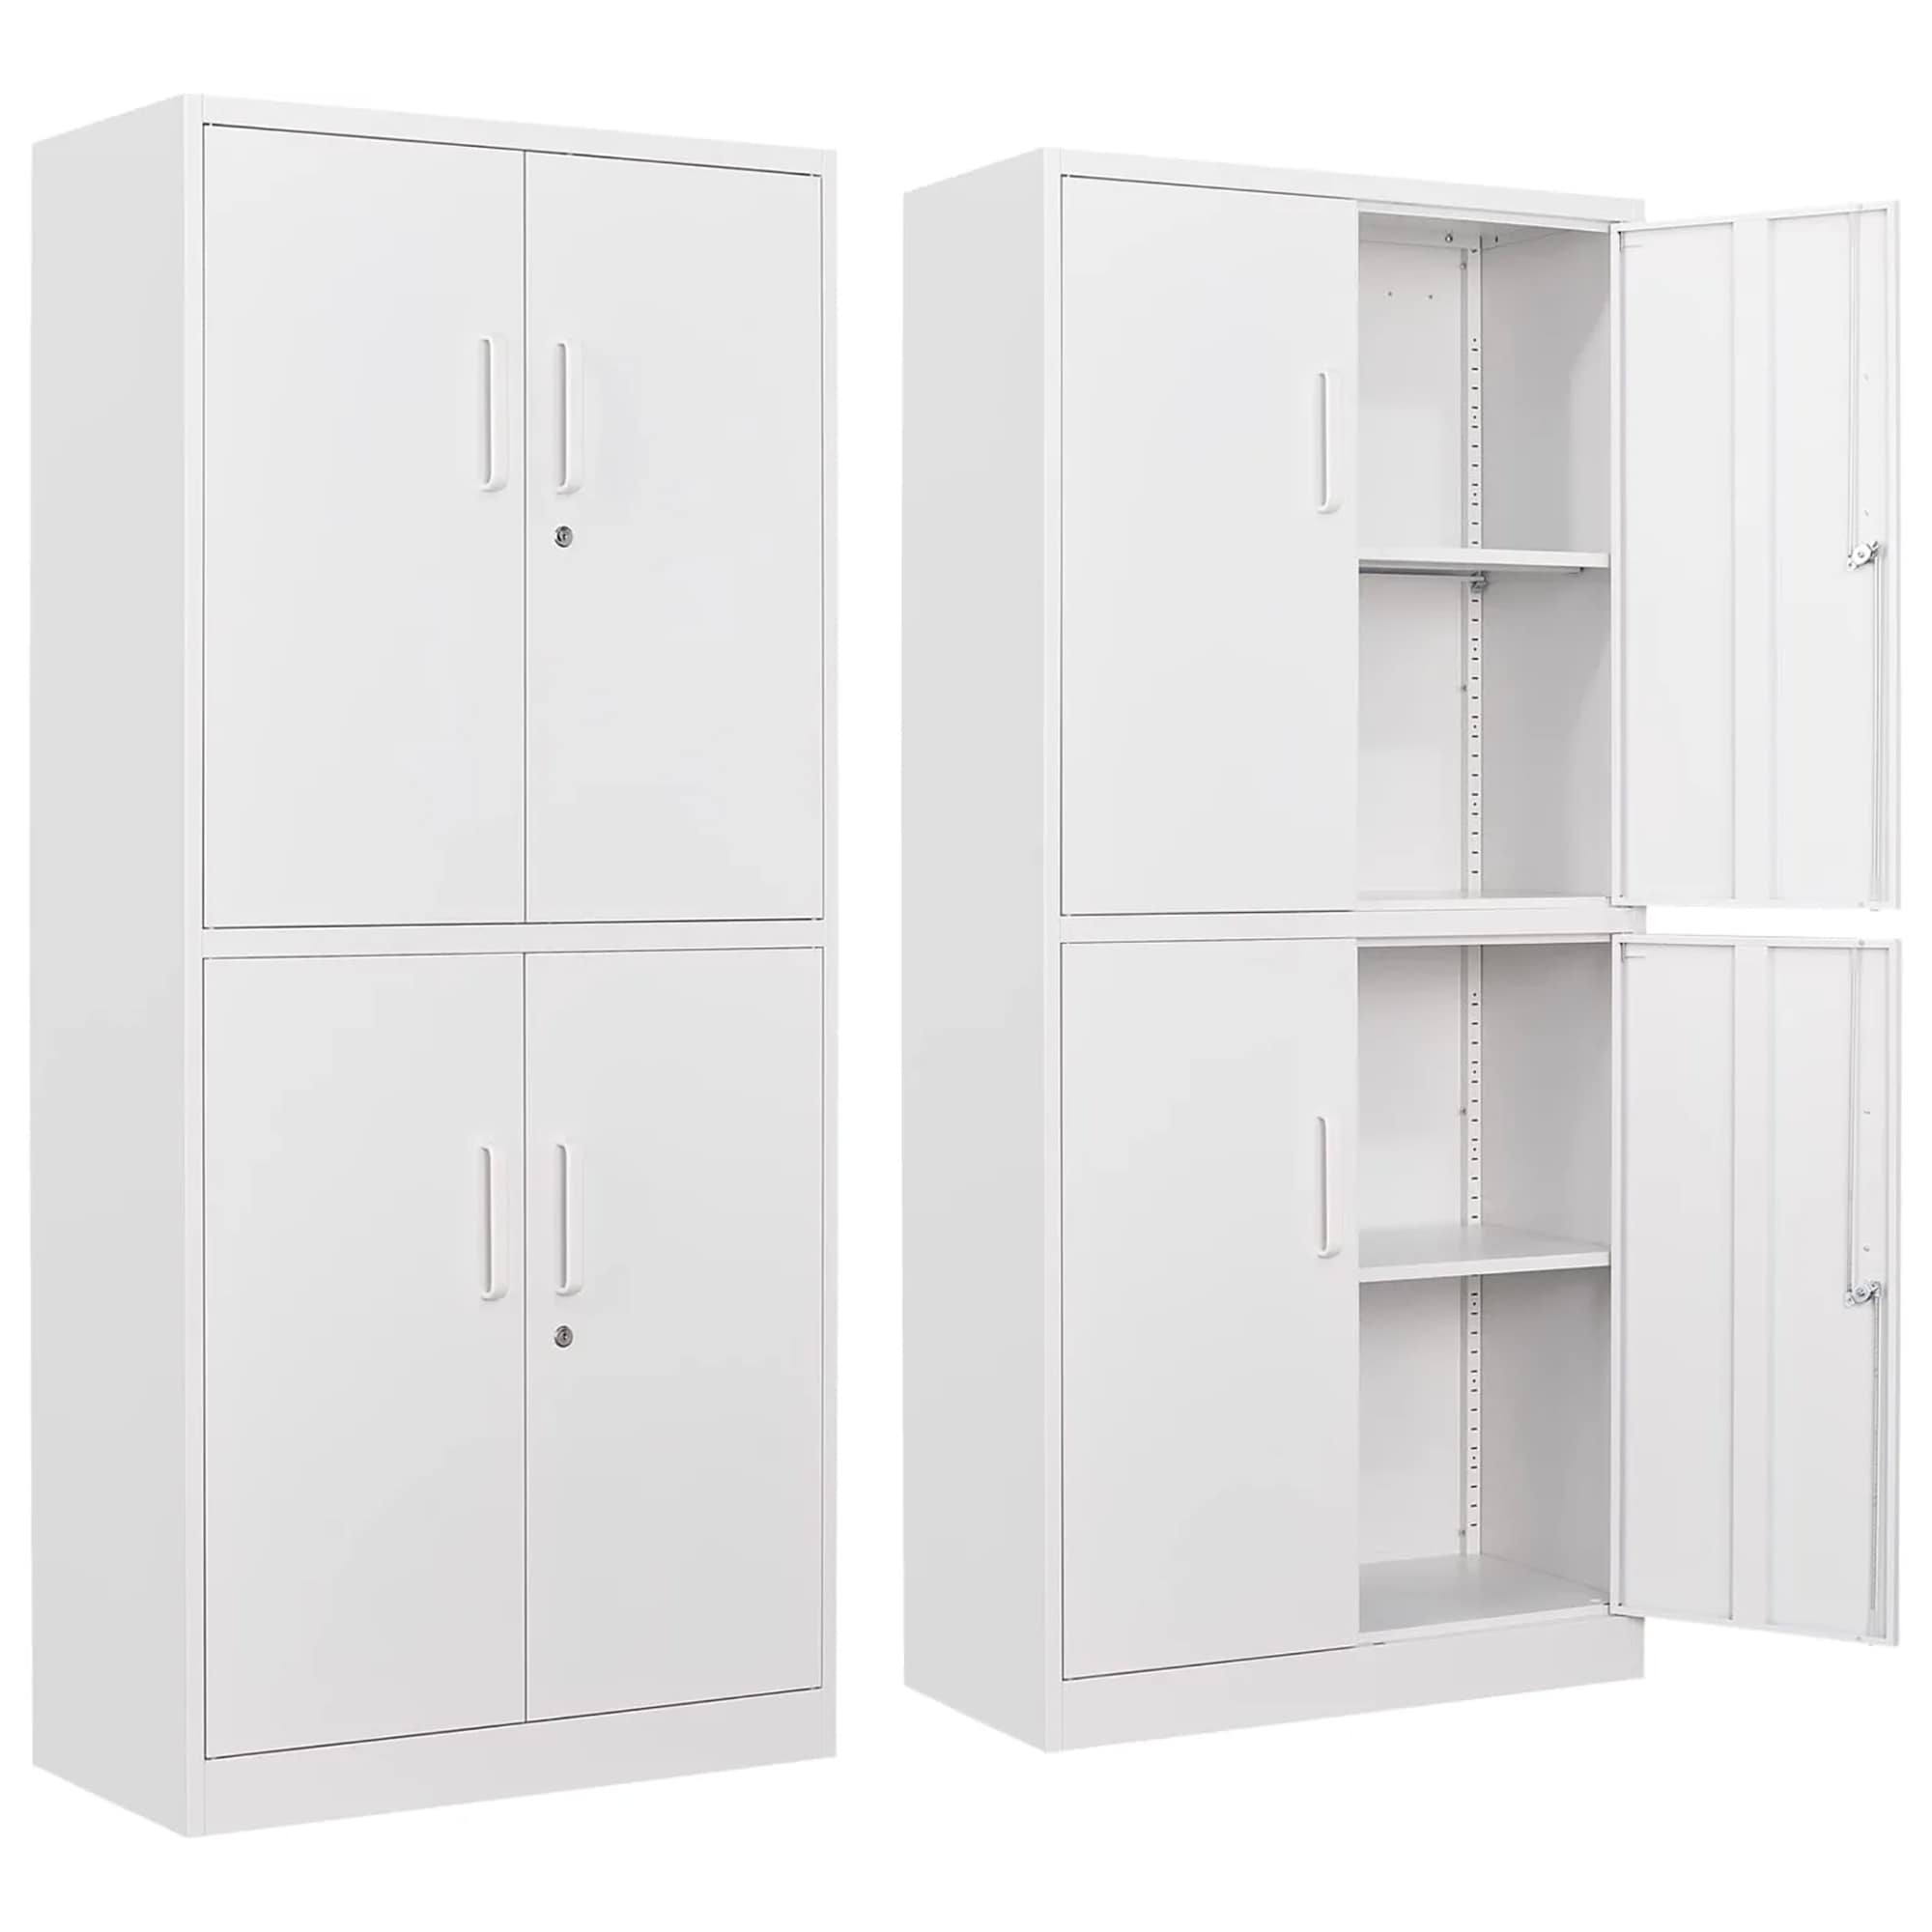 https://ak1.ostkcdn.com/images/products/is/images/direct/f99e1cdb0fbf8939d1aaaddf8a1b4dafedeb956a/Metal-Storage-Cabinet-Locking-Steel-Storage-Cabinet-with-4-Doors-and-2-Adjustable-Shelves.jpg